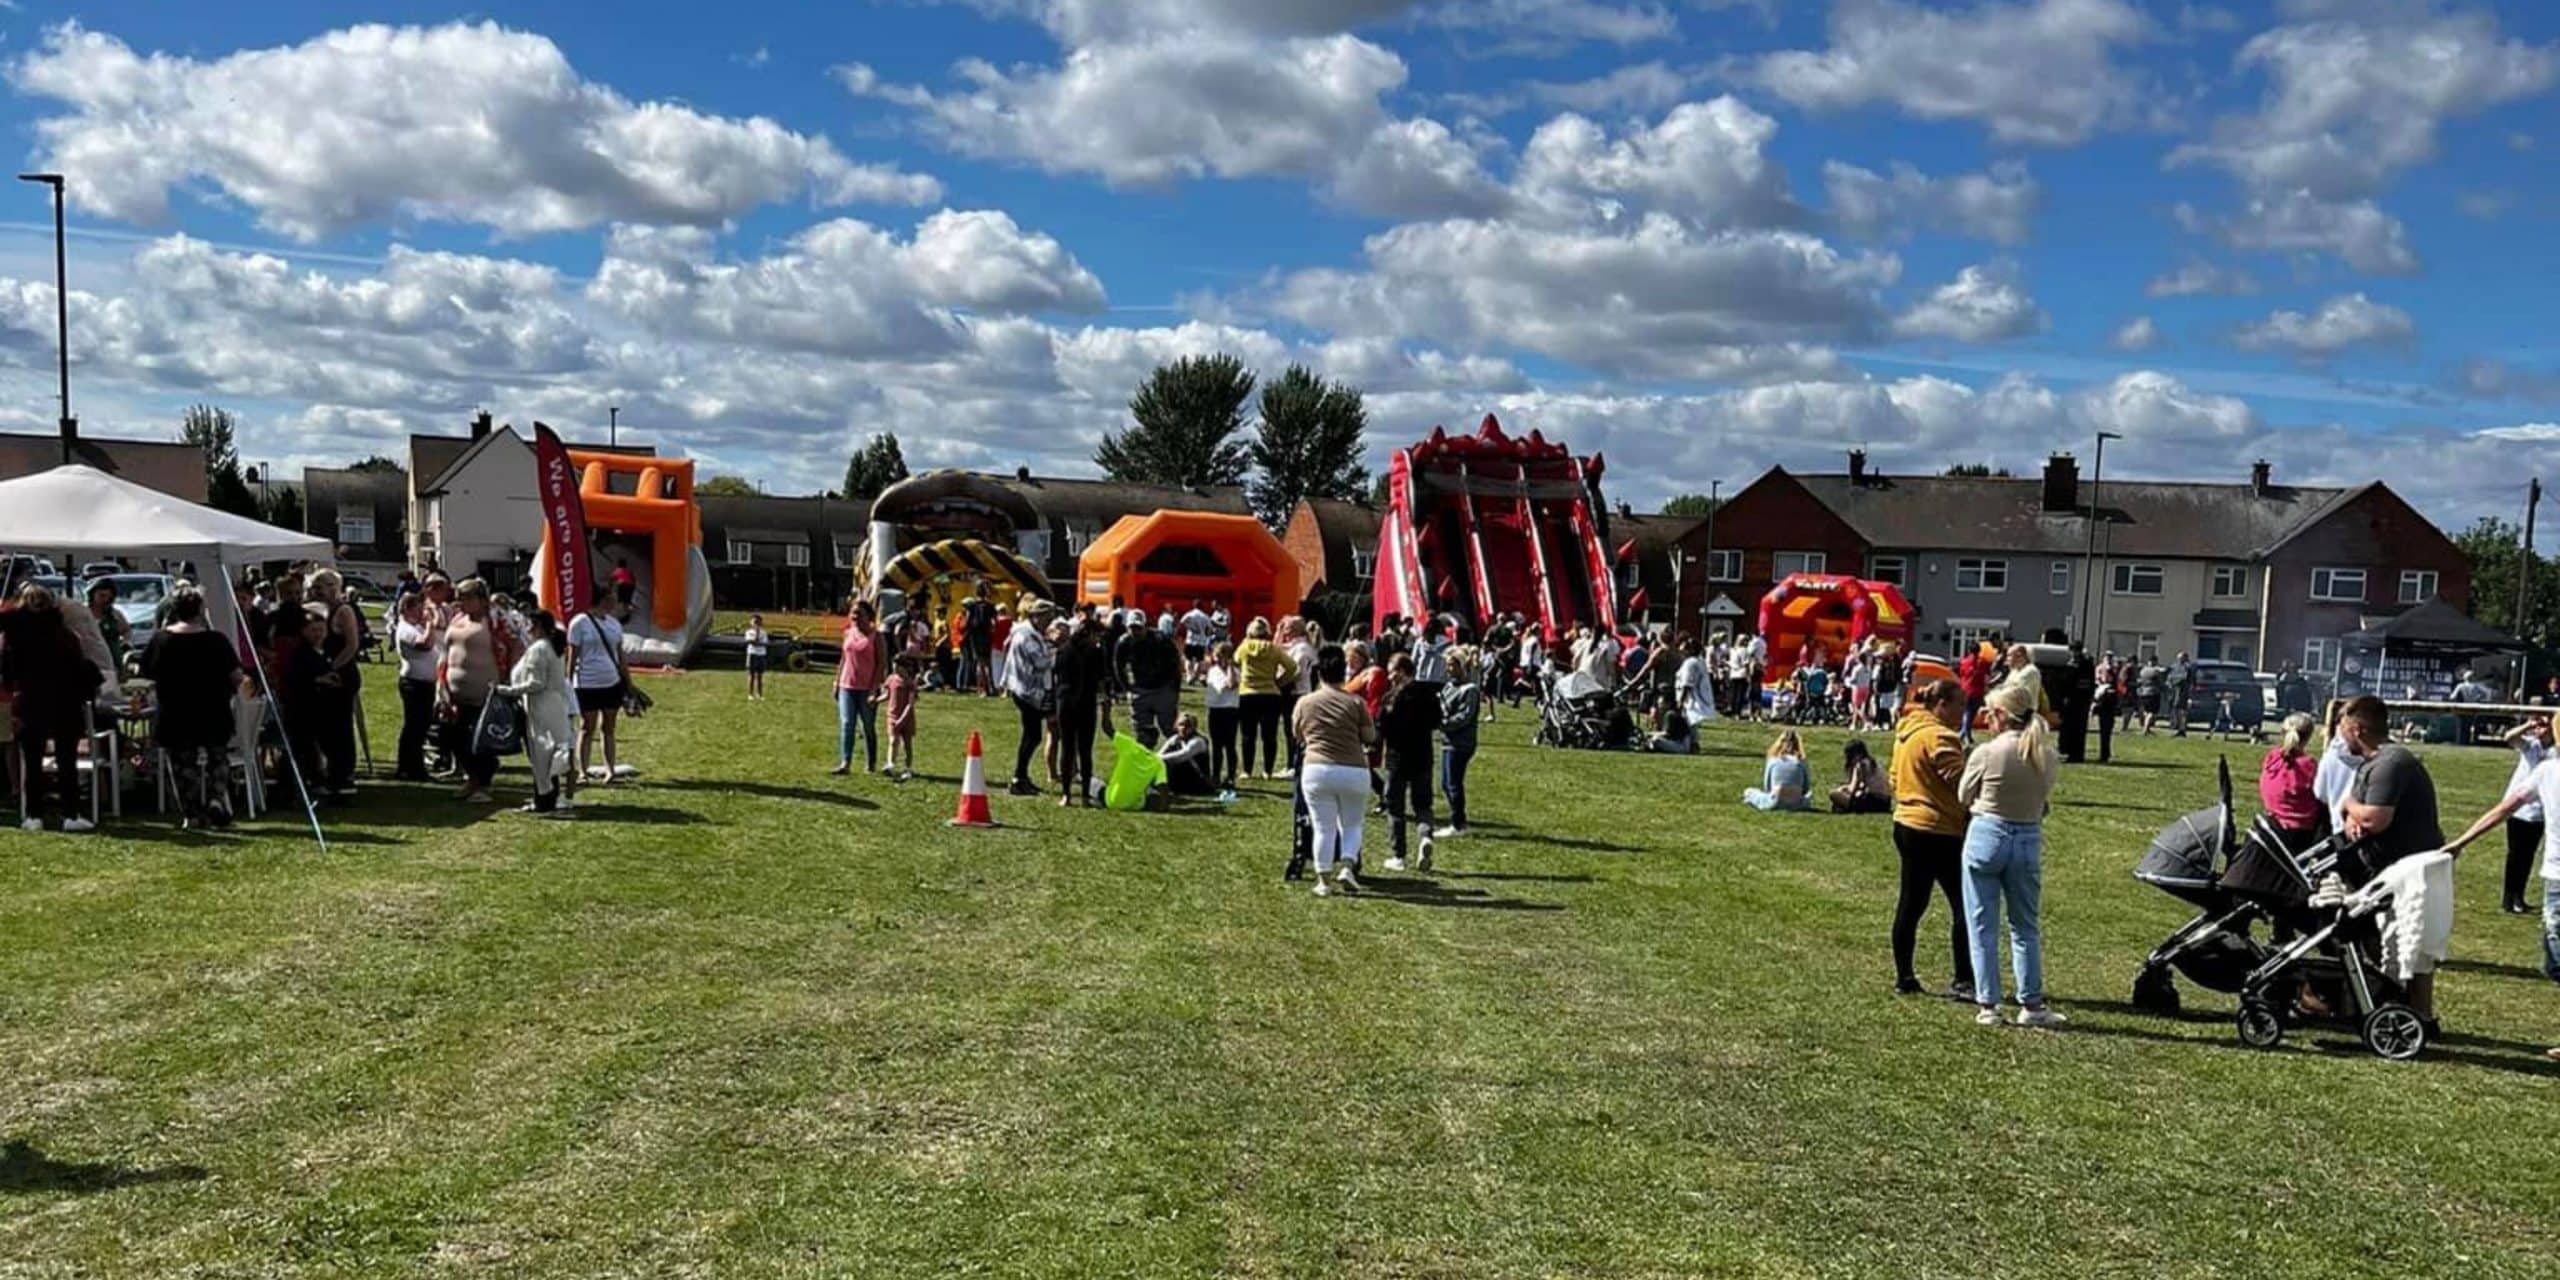 A bright and sunny day on a grass field with large inflatables, gazebos and a large crowd